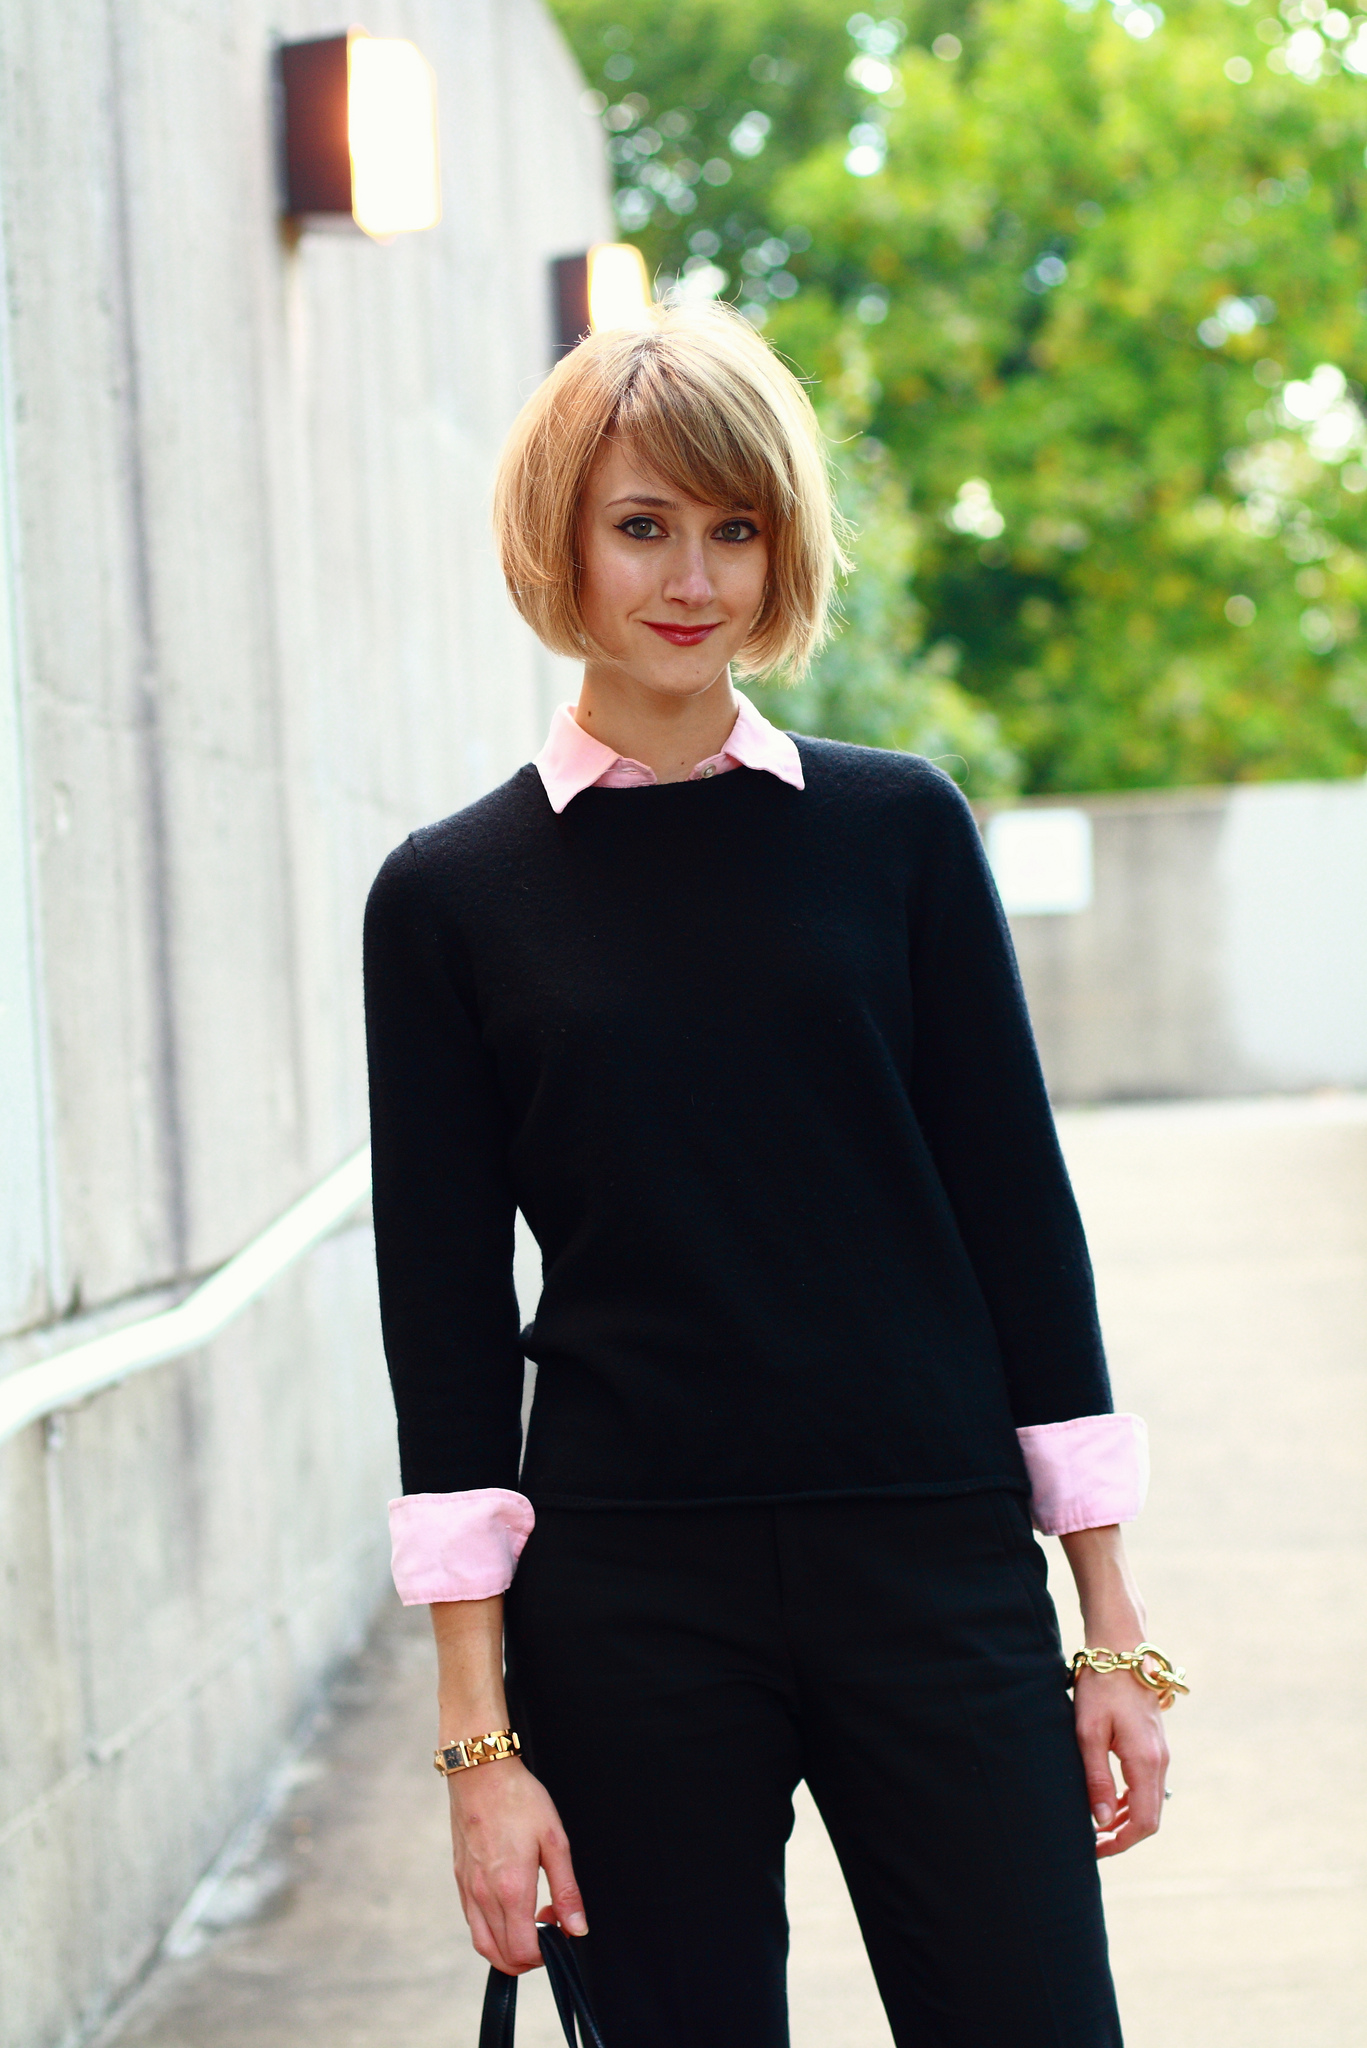 pink and black work outfit